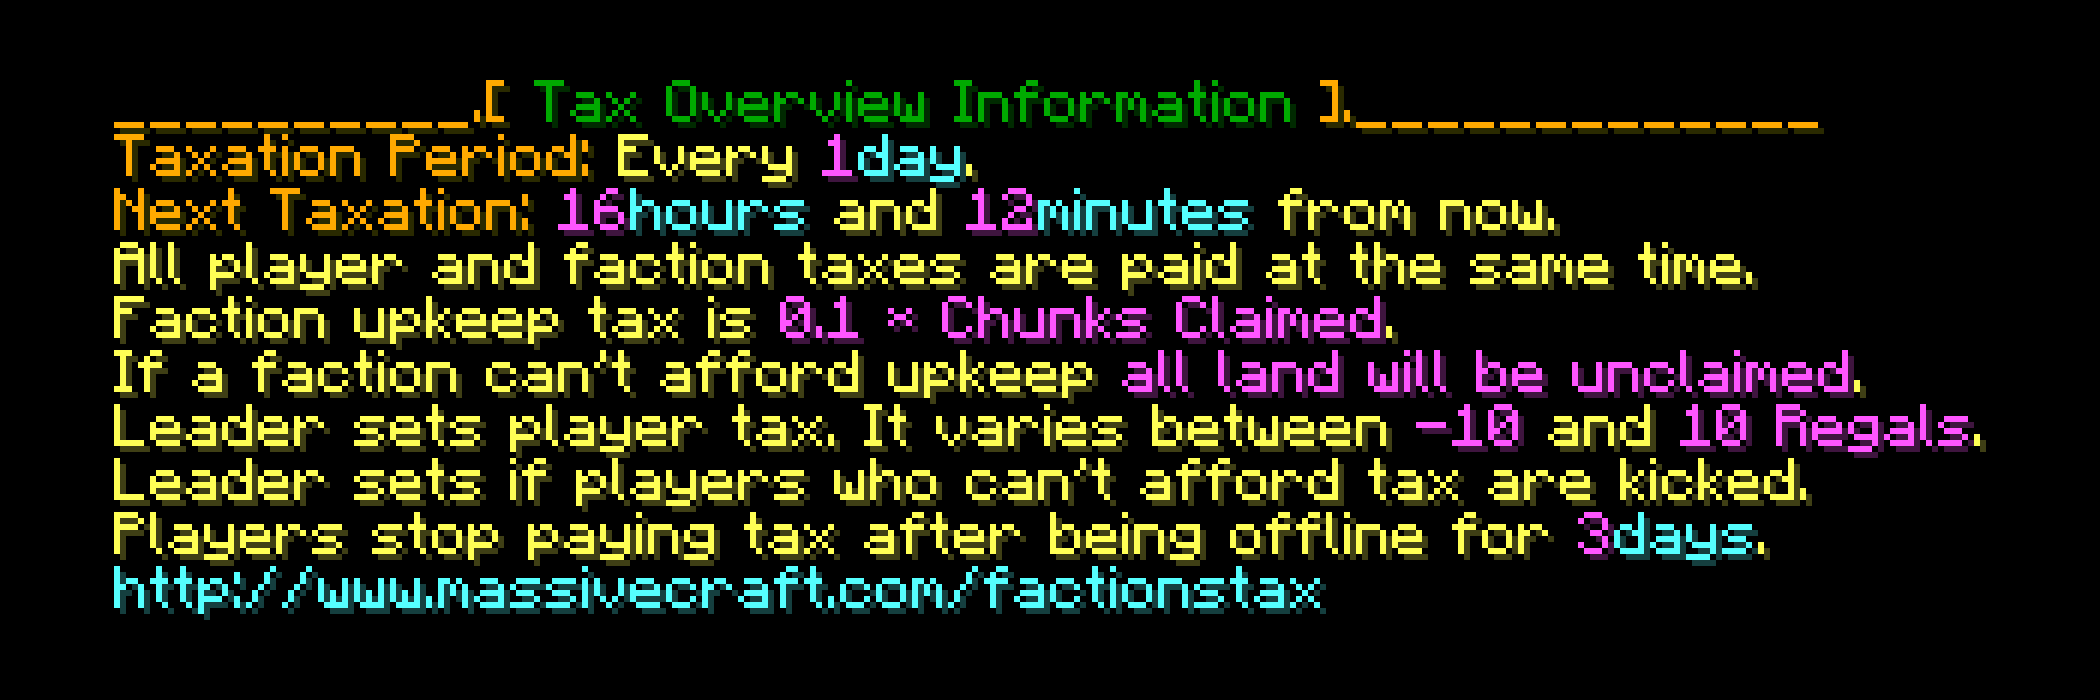 factionstax-command-information.png